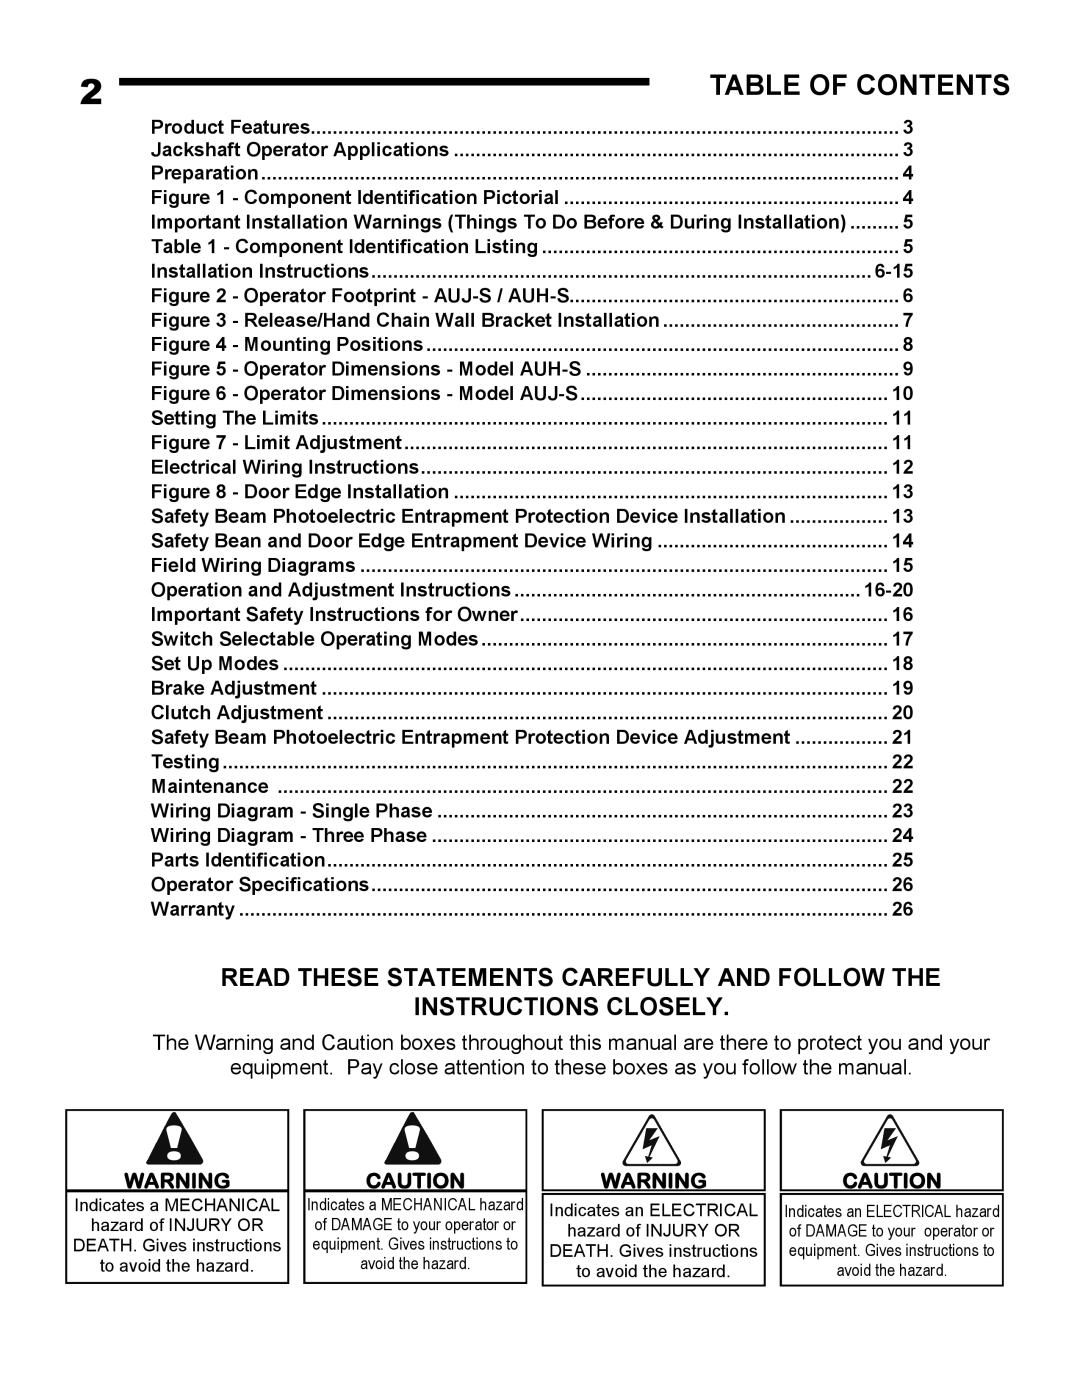 Linear AUJ-S Table Of Contents, Read These Statements Carefully And Follow The Instructions Closely, 6-15, 16-20, Warranty 